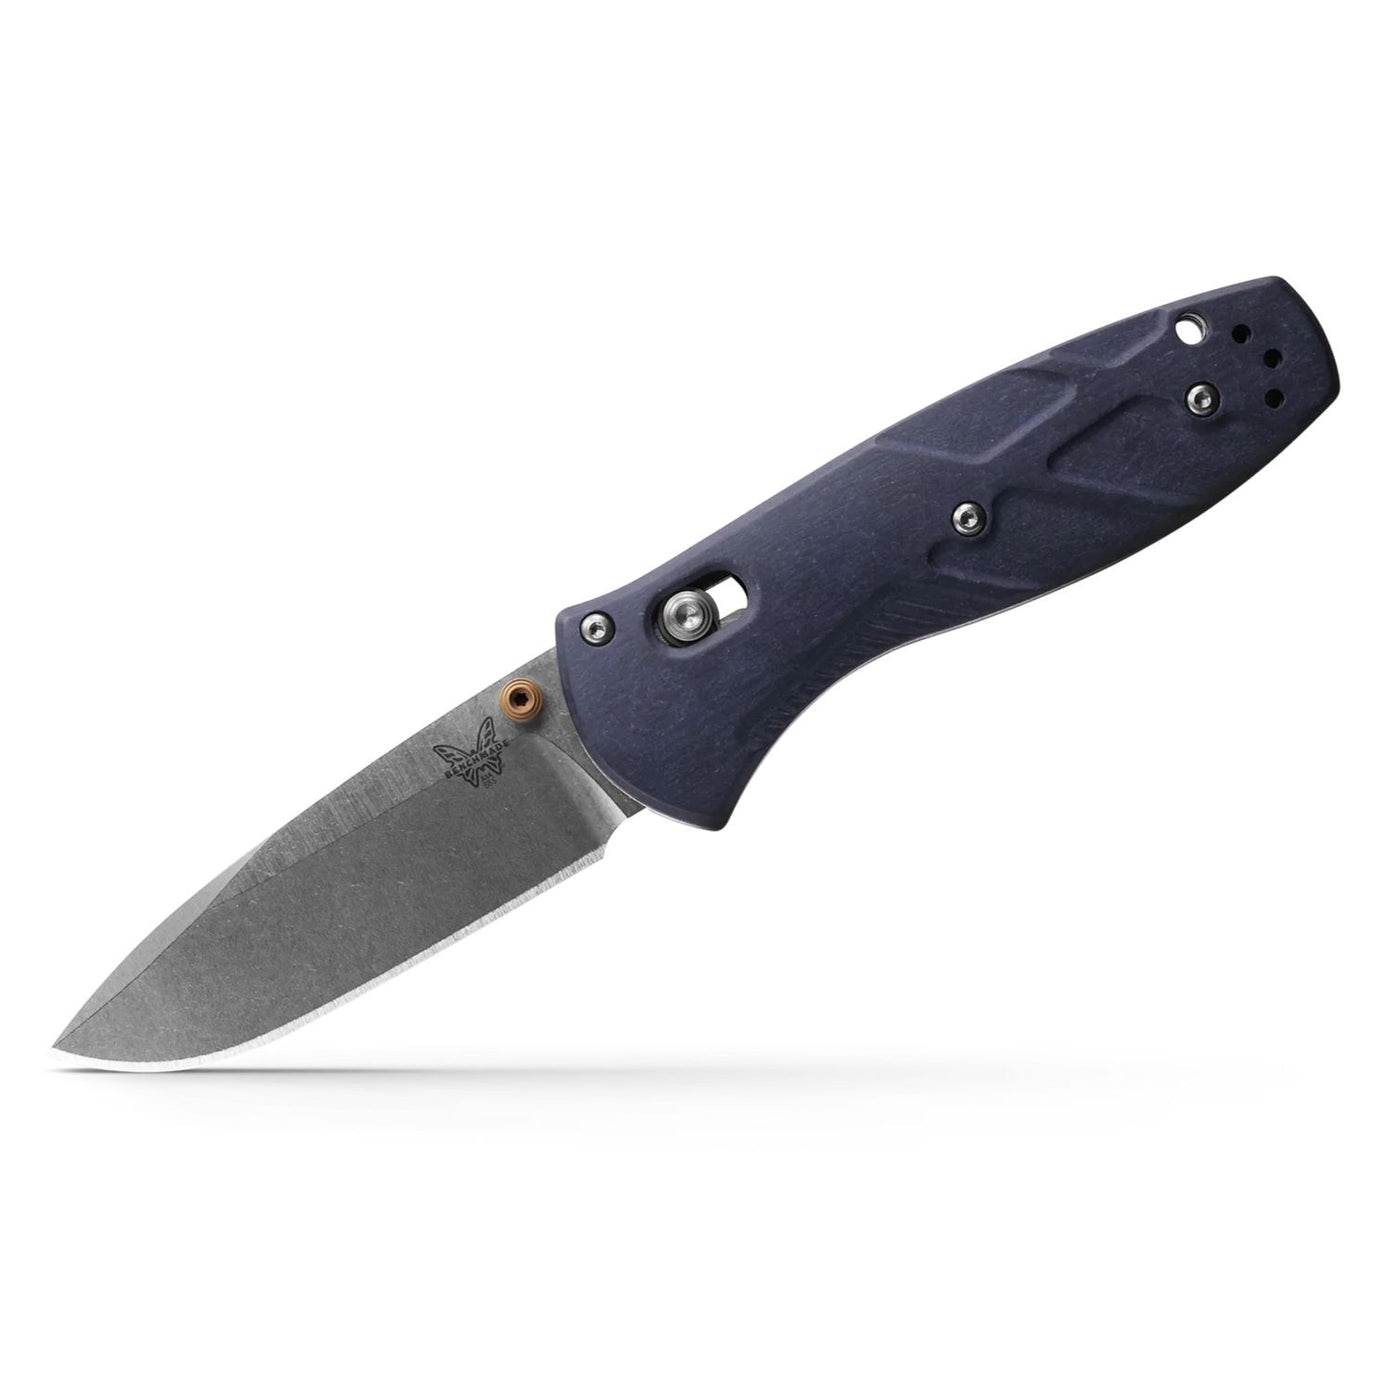 Benchmade Mini Barrage Knife-Knives & Tools-585-03-Kevin's Fine Outdoor Gear & Apparel